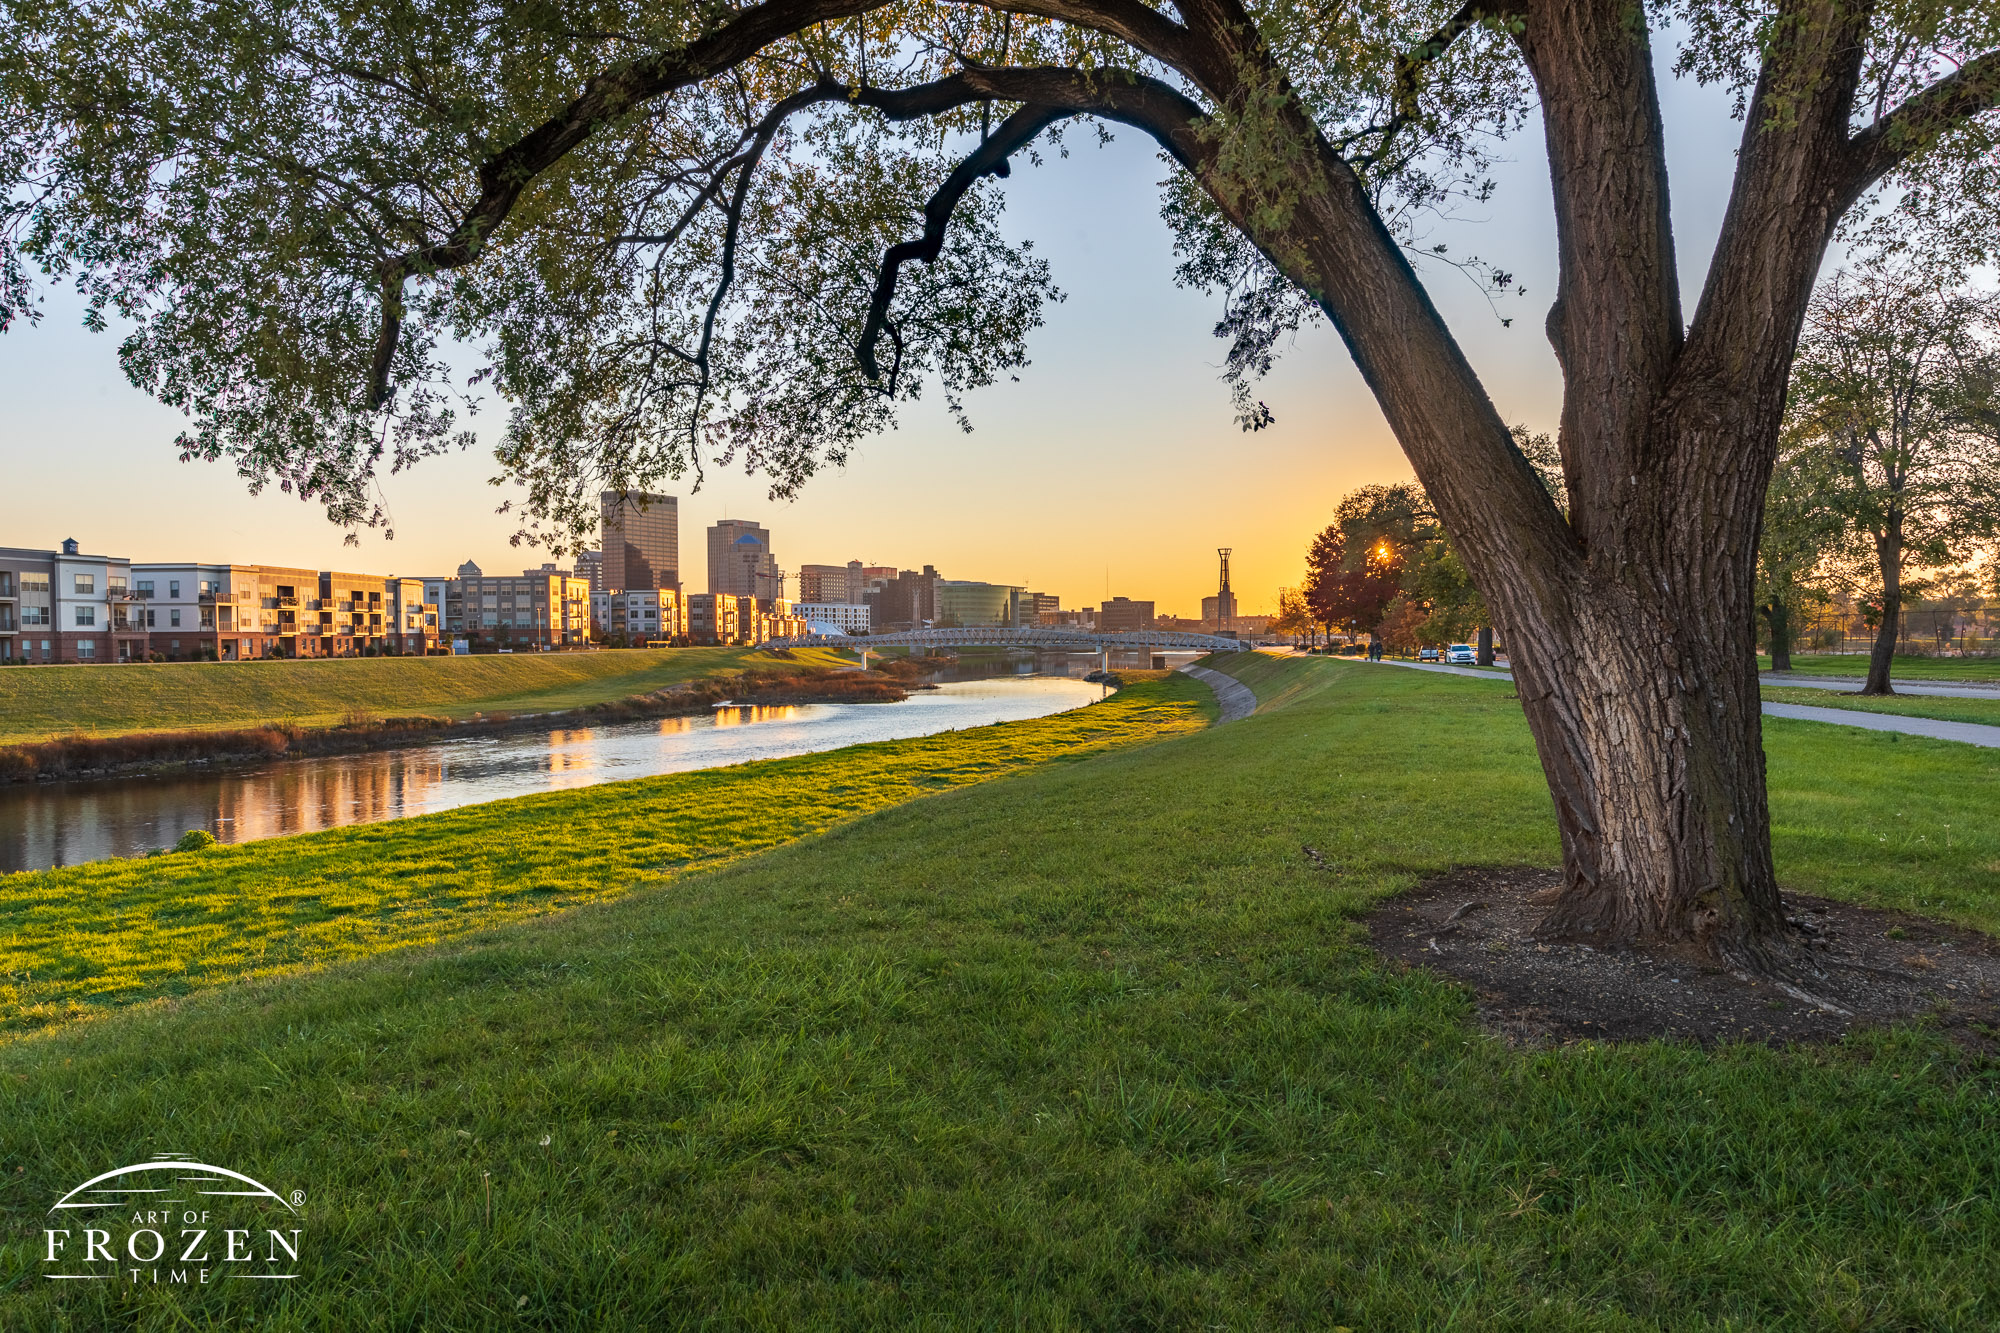 The Dayton Skyline compositionally framed by a mature tree along the Mad River as the evening sun paints the ground in golden light.